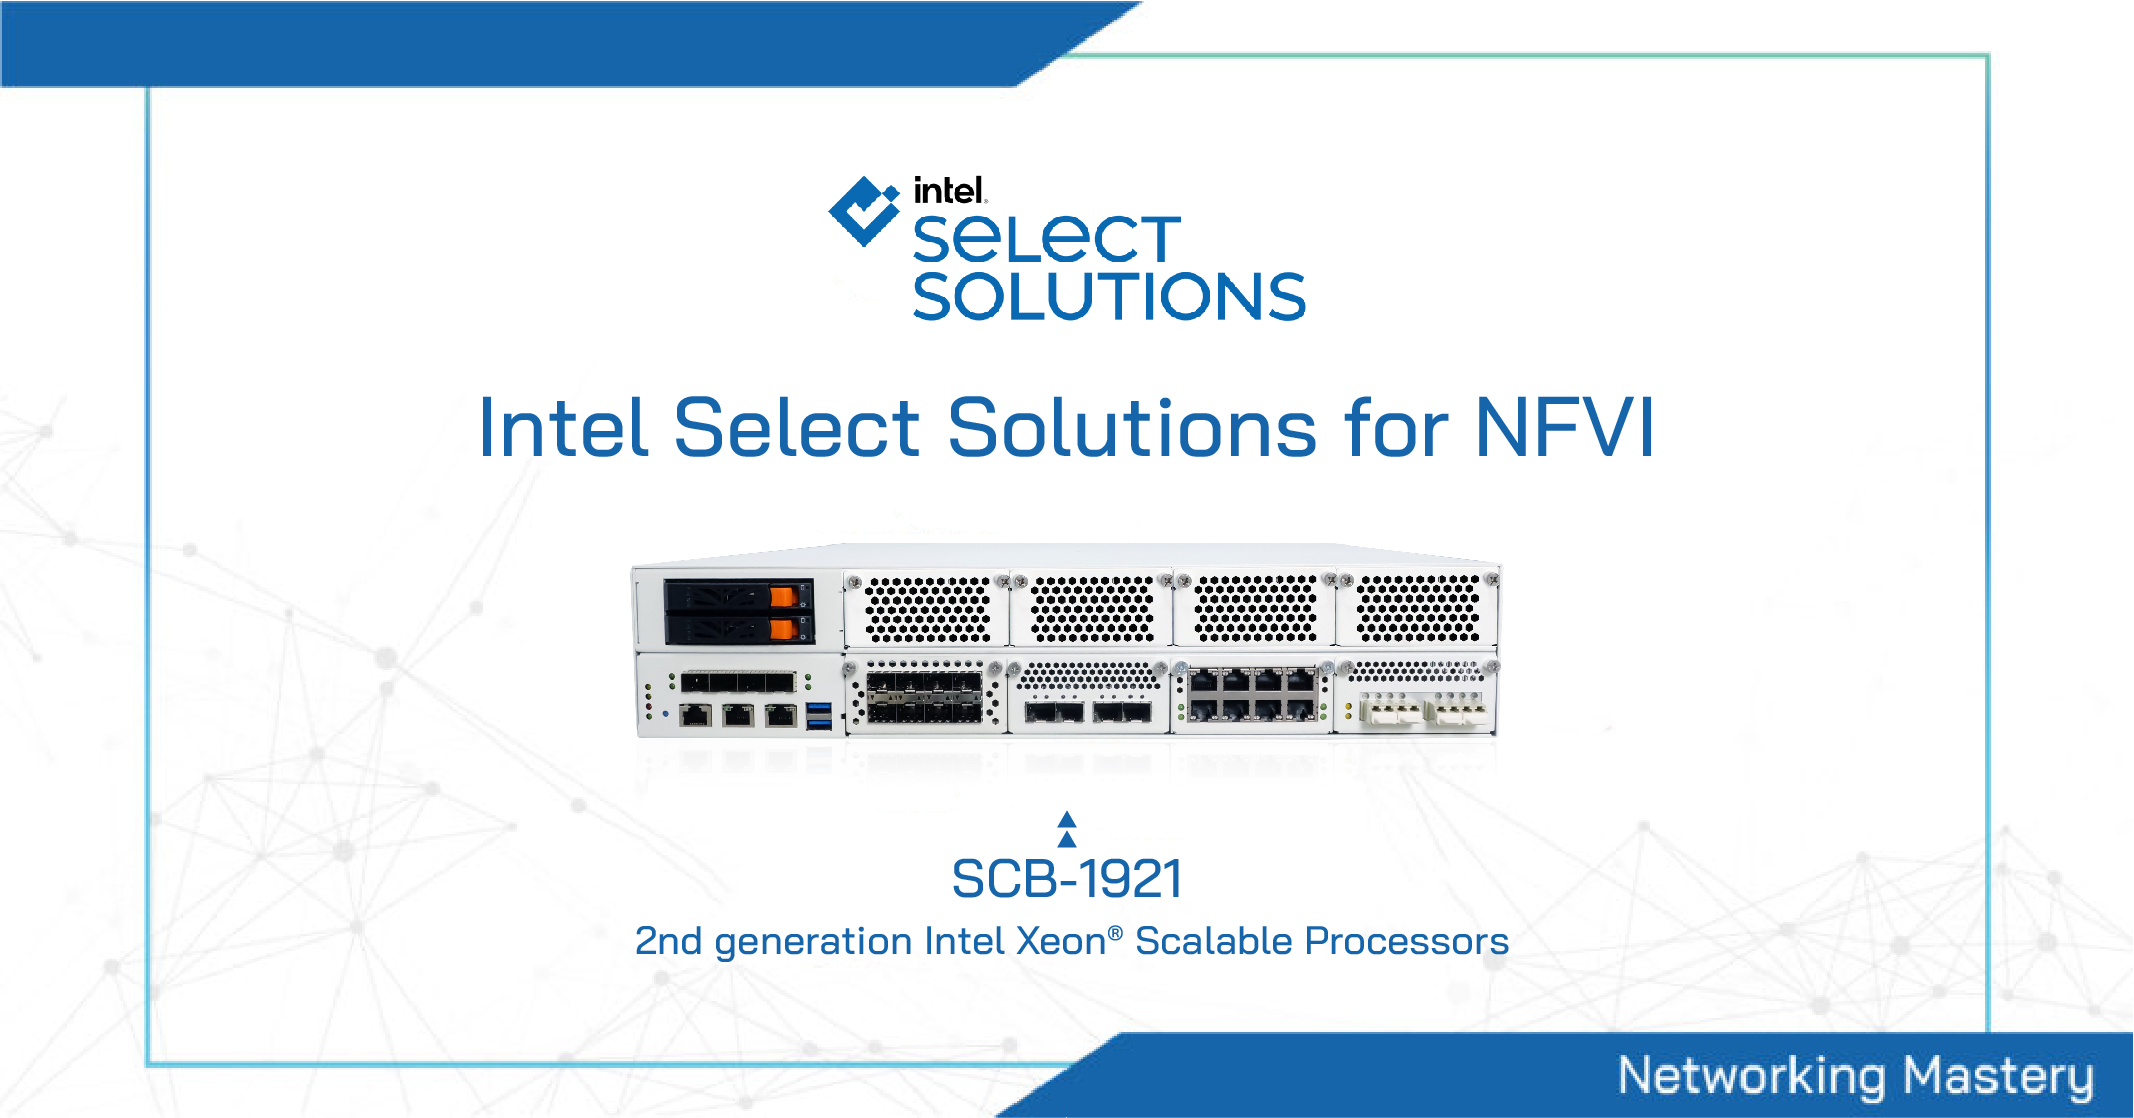 intel select solutions for NFVI